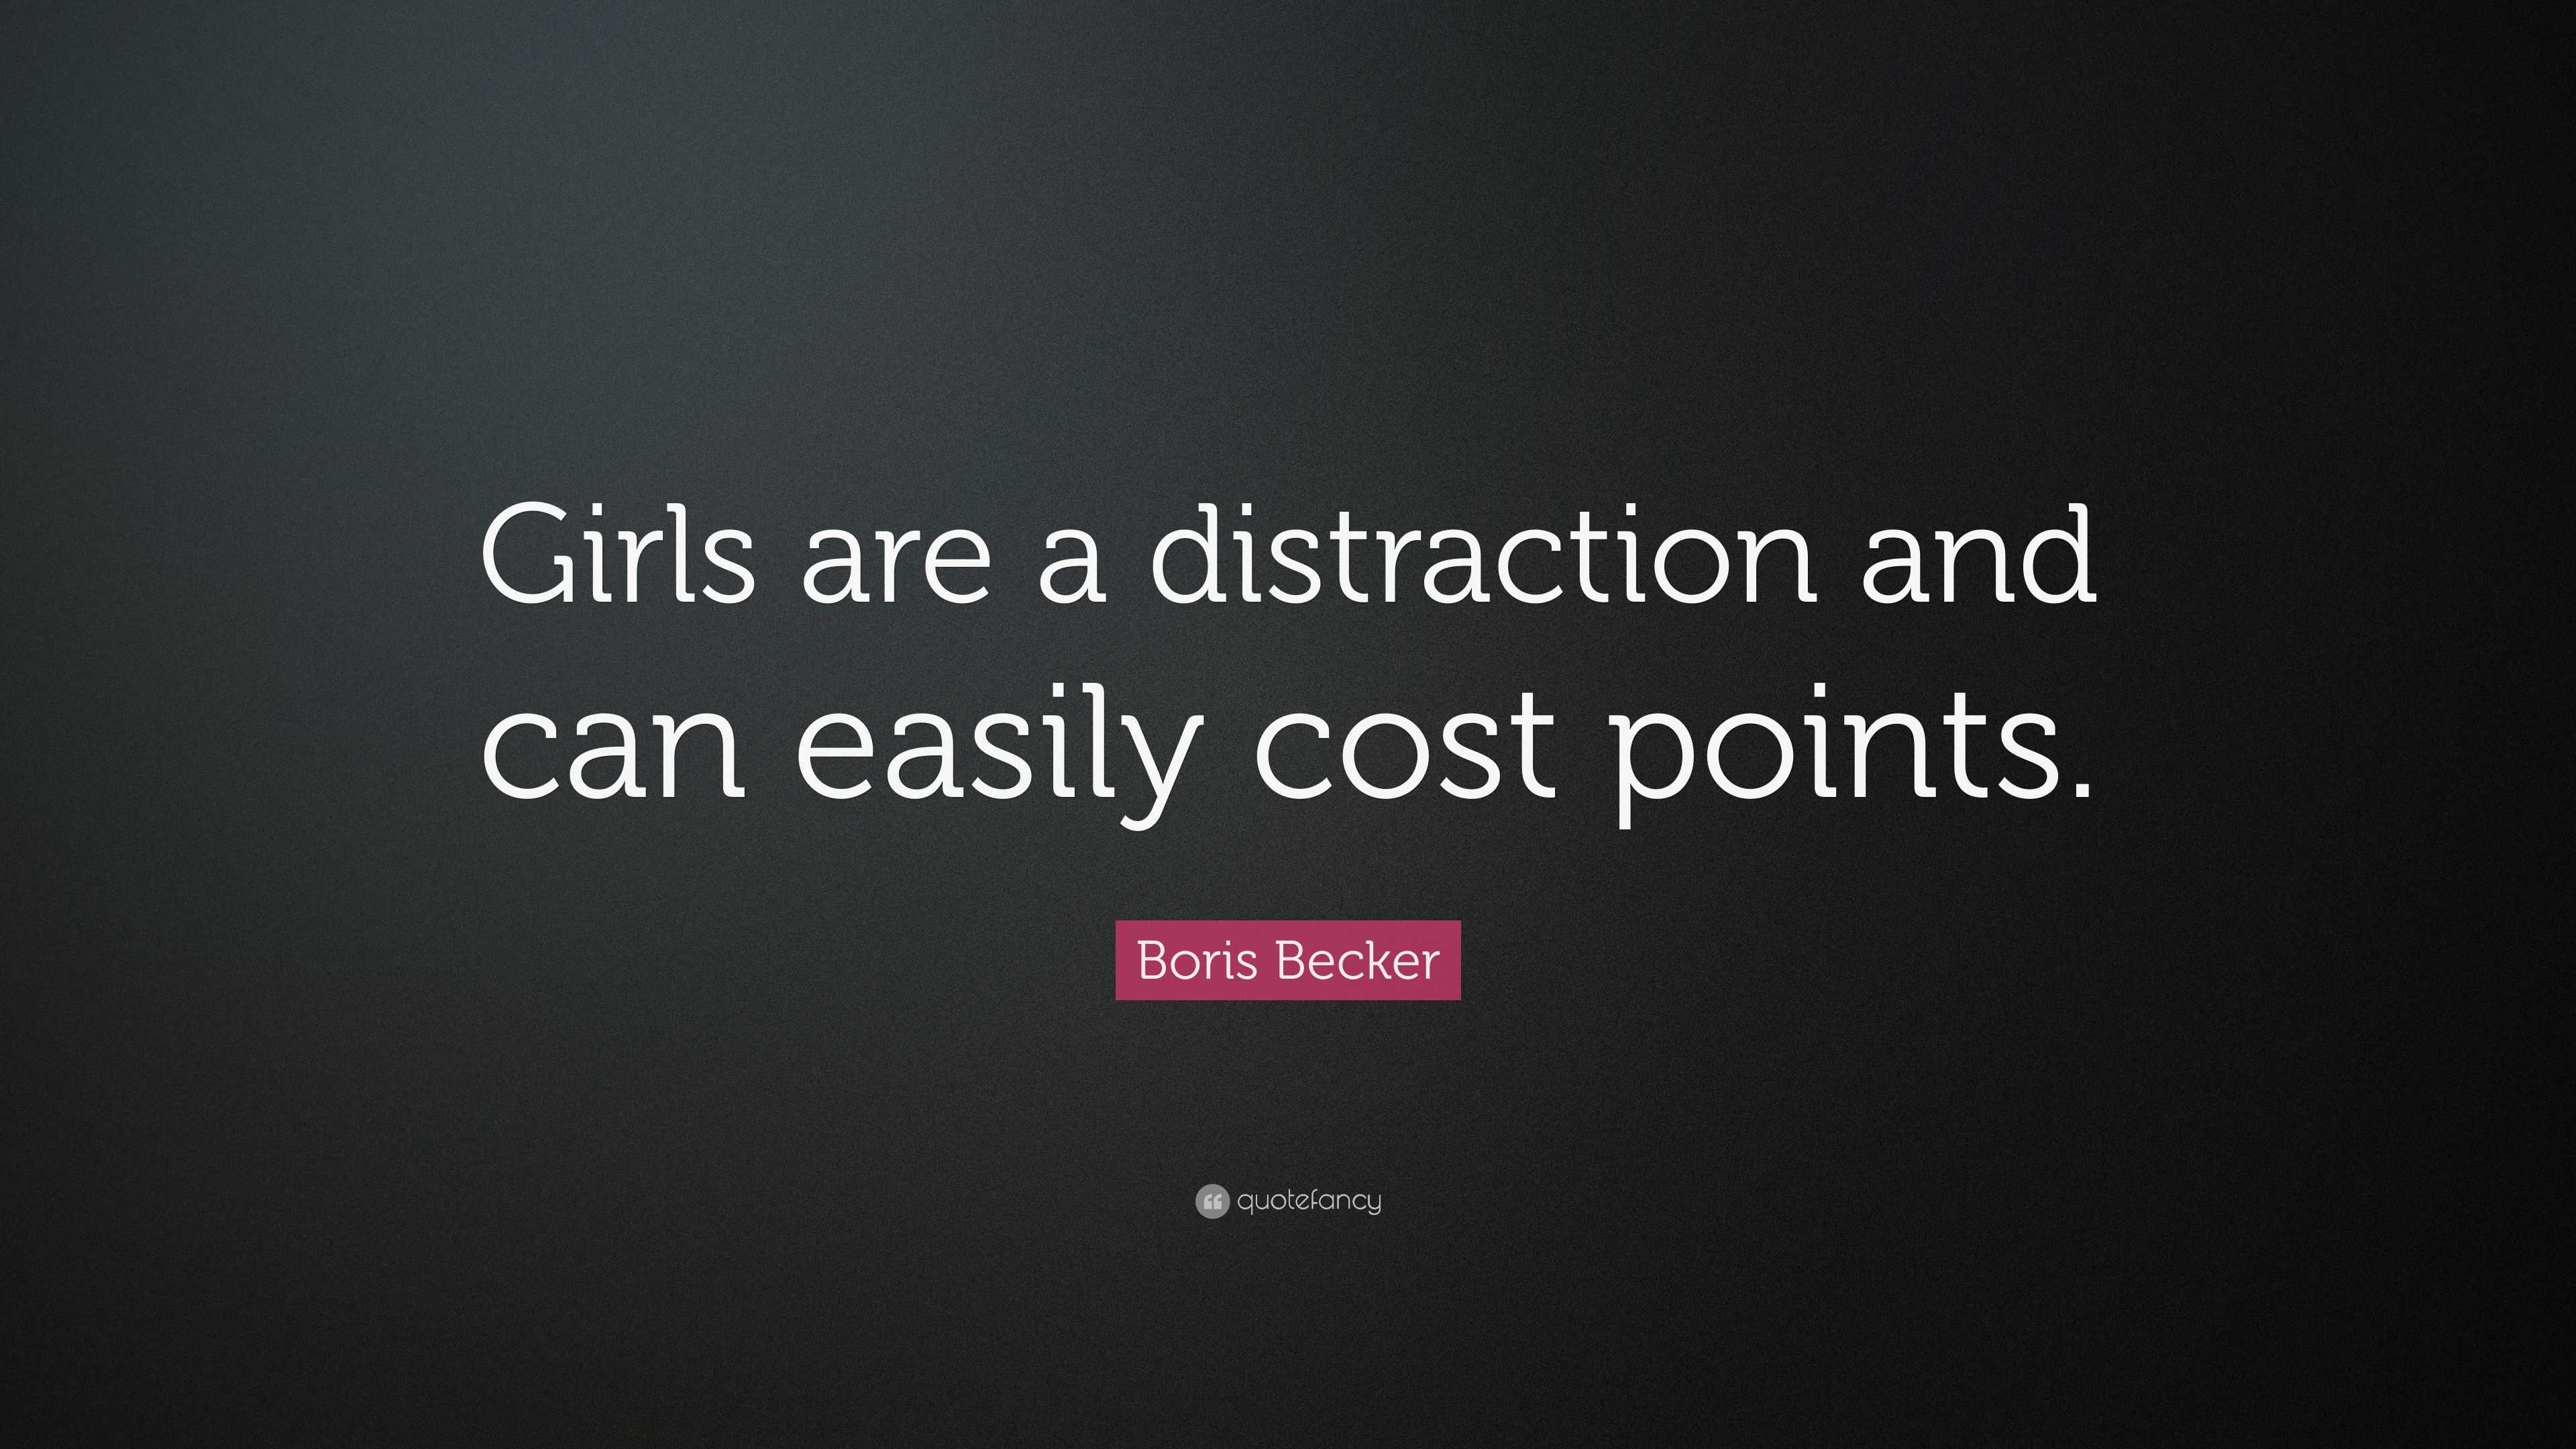 Boris Becker Quote: “Girls are a distraction and can easily cost points.”